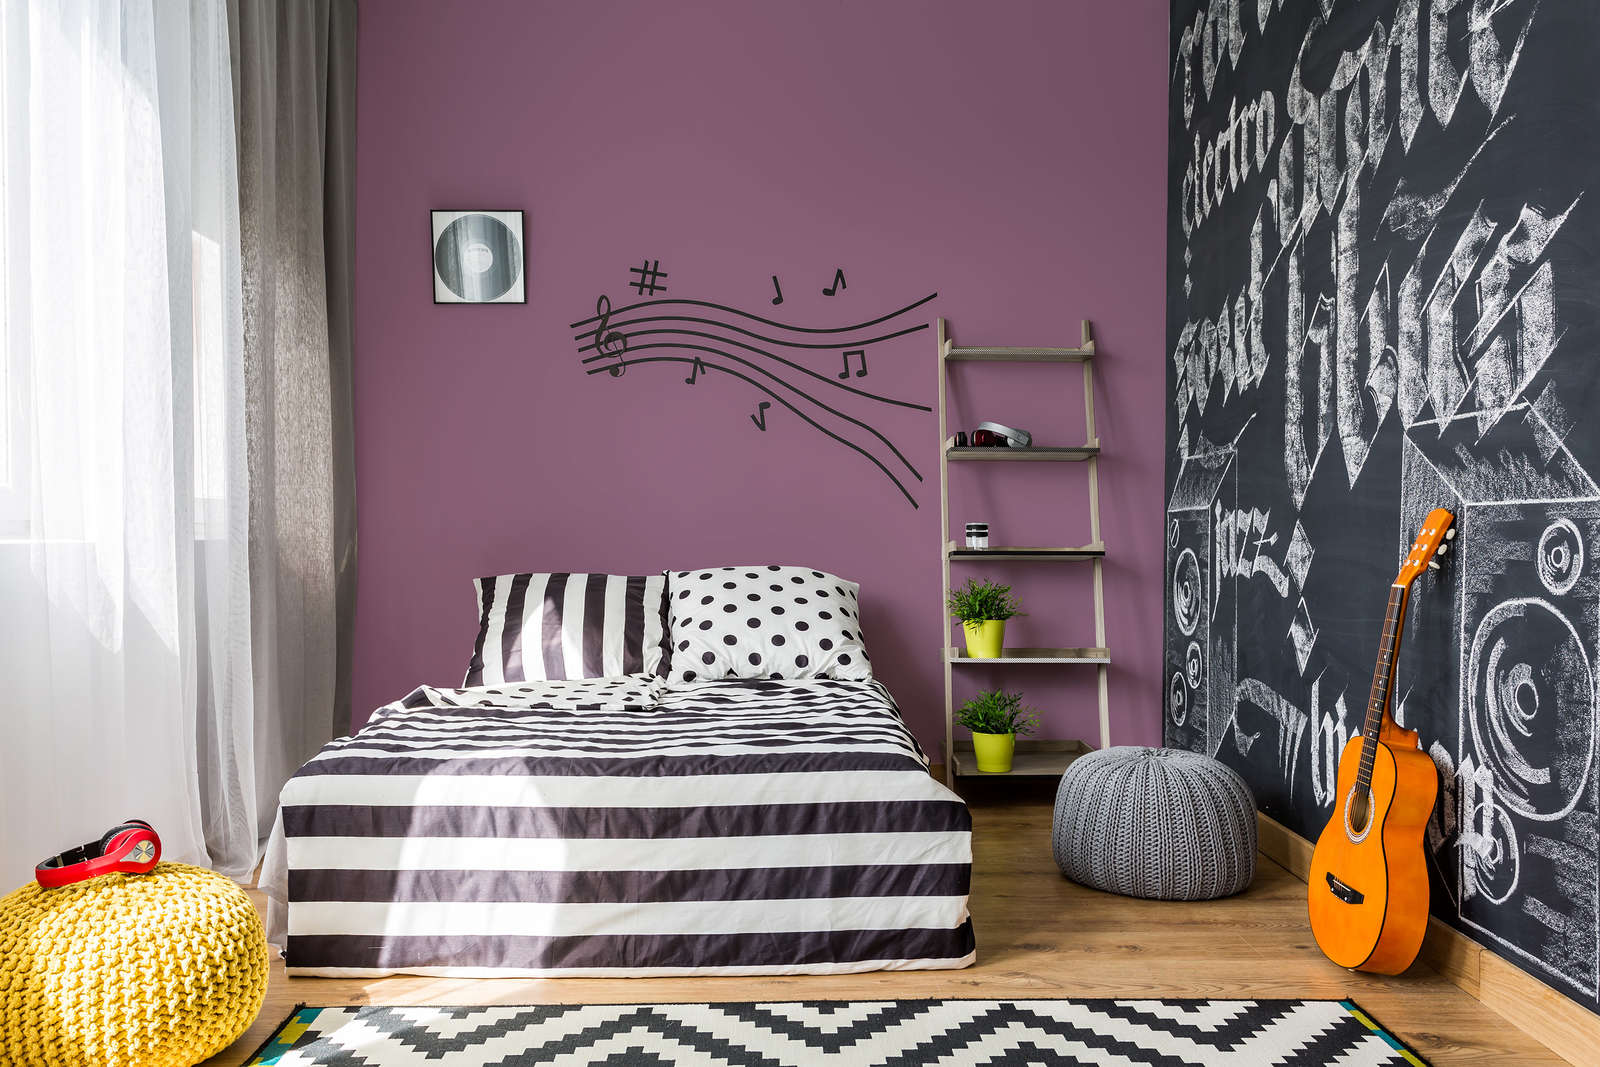             Premium Wall Paint cheerful berry »Beautiful Berry« NW211 – 2,5 litre
        